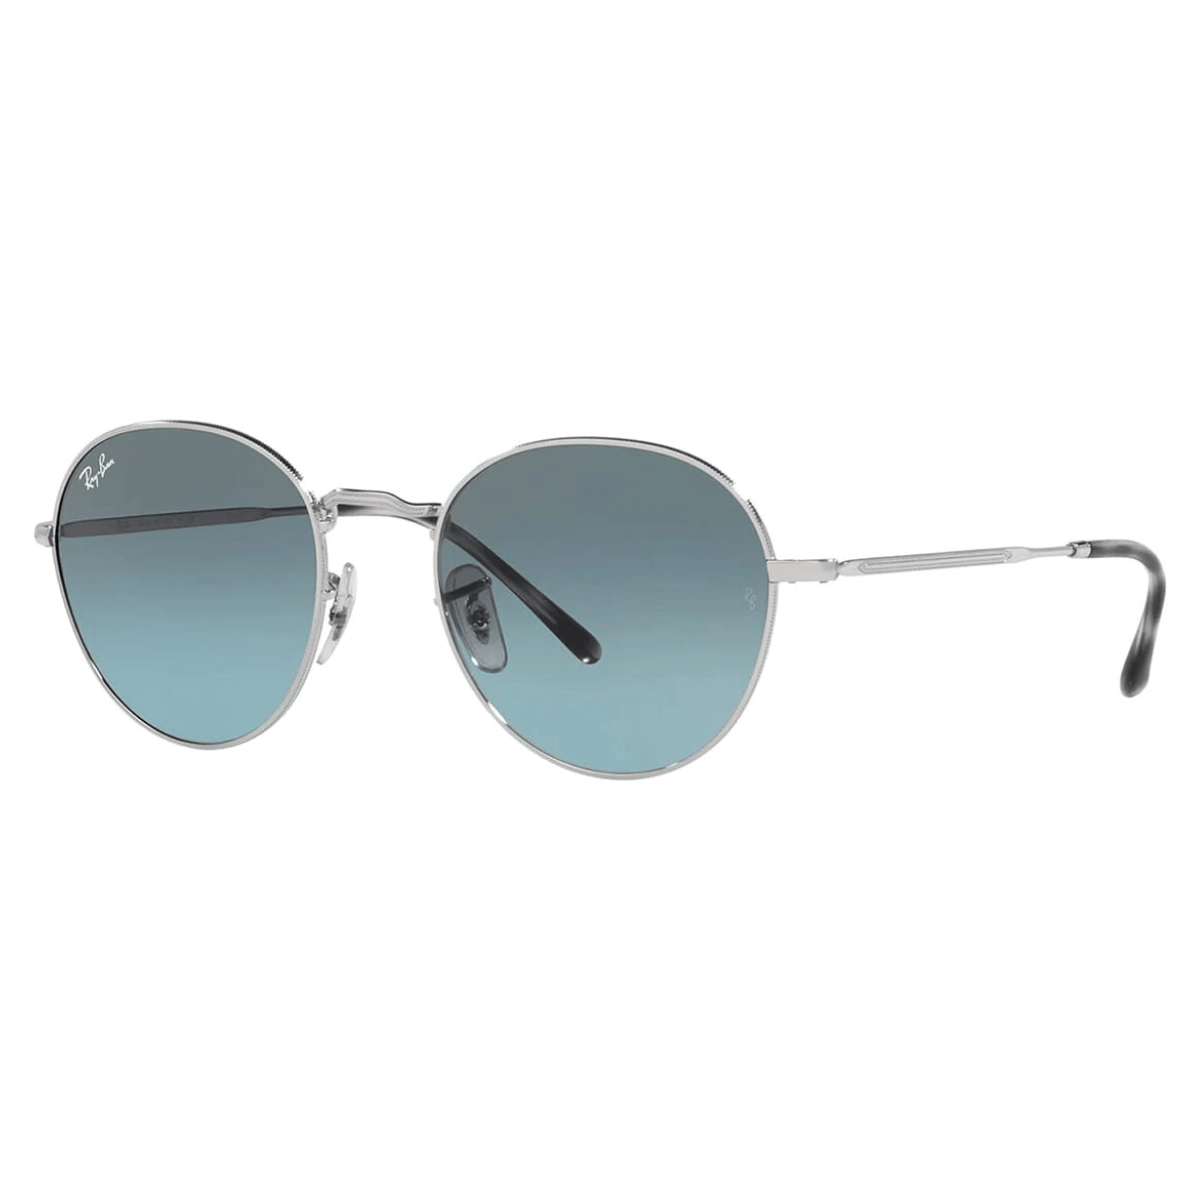 "Optorium introduces Rayban RB3582 Sunglass: Add flair to your outfit with its polished silver frame and Rayban blue shades. Perfect for fashion-forward individuals, available for both men and women."